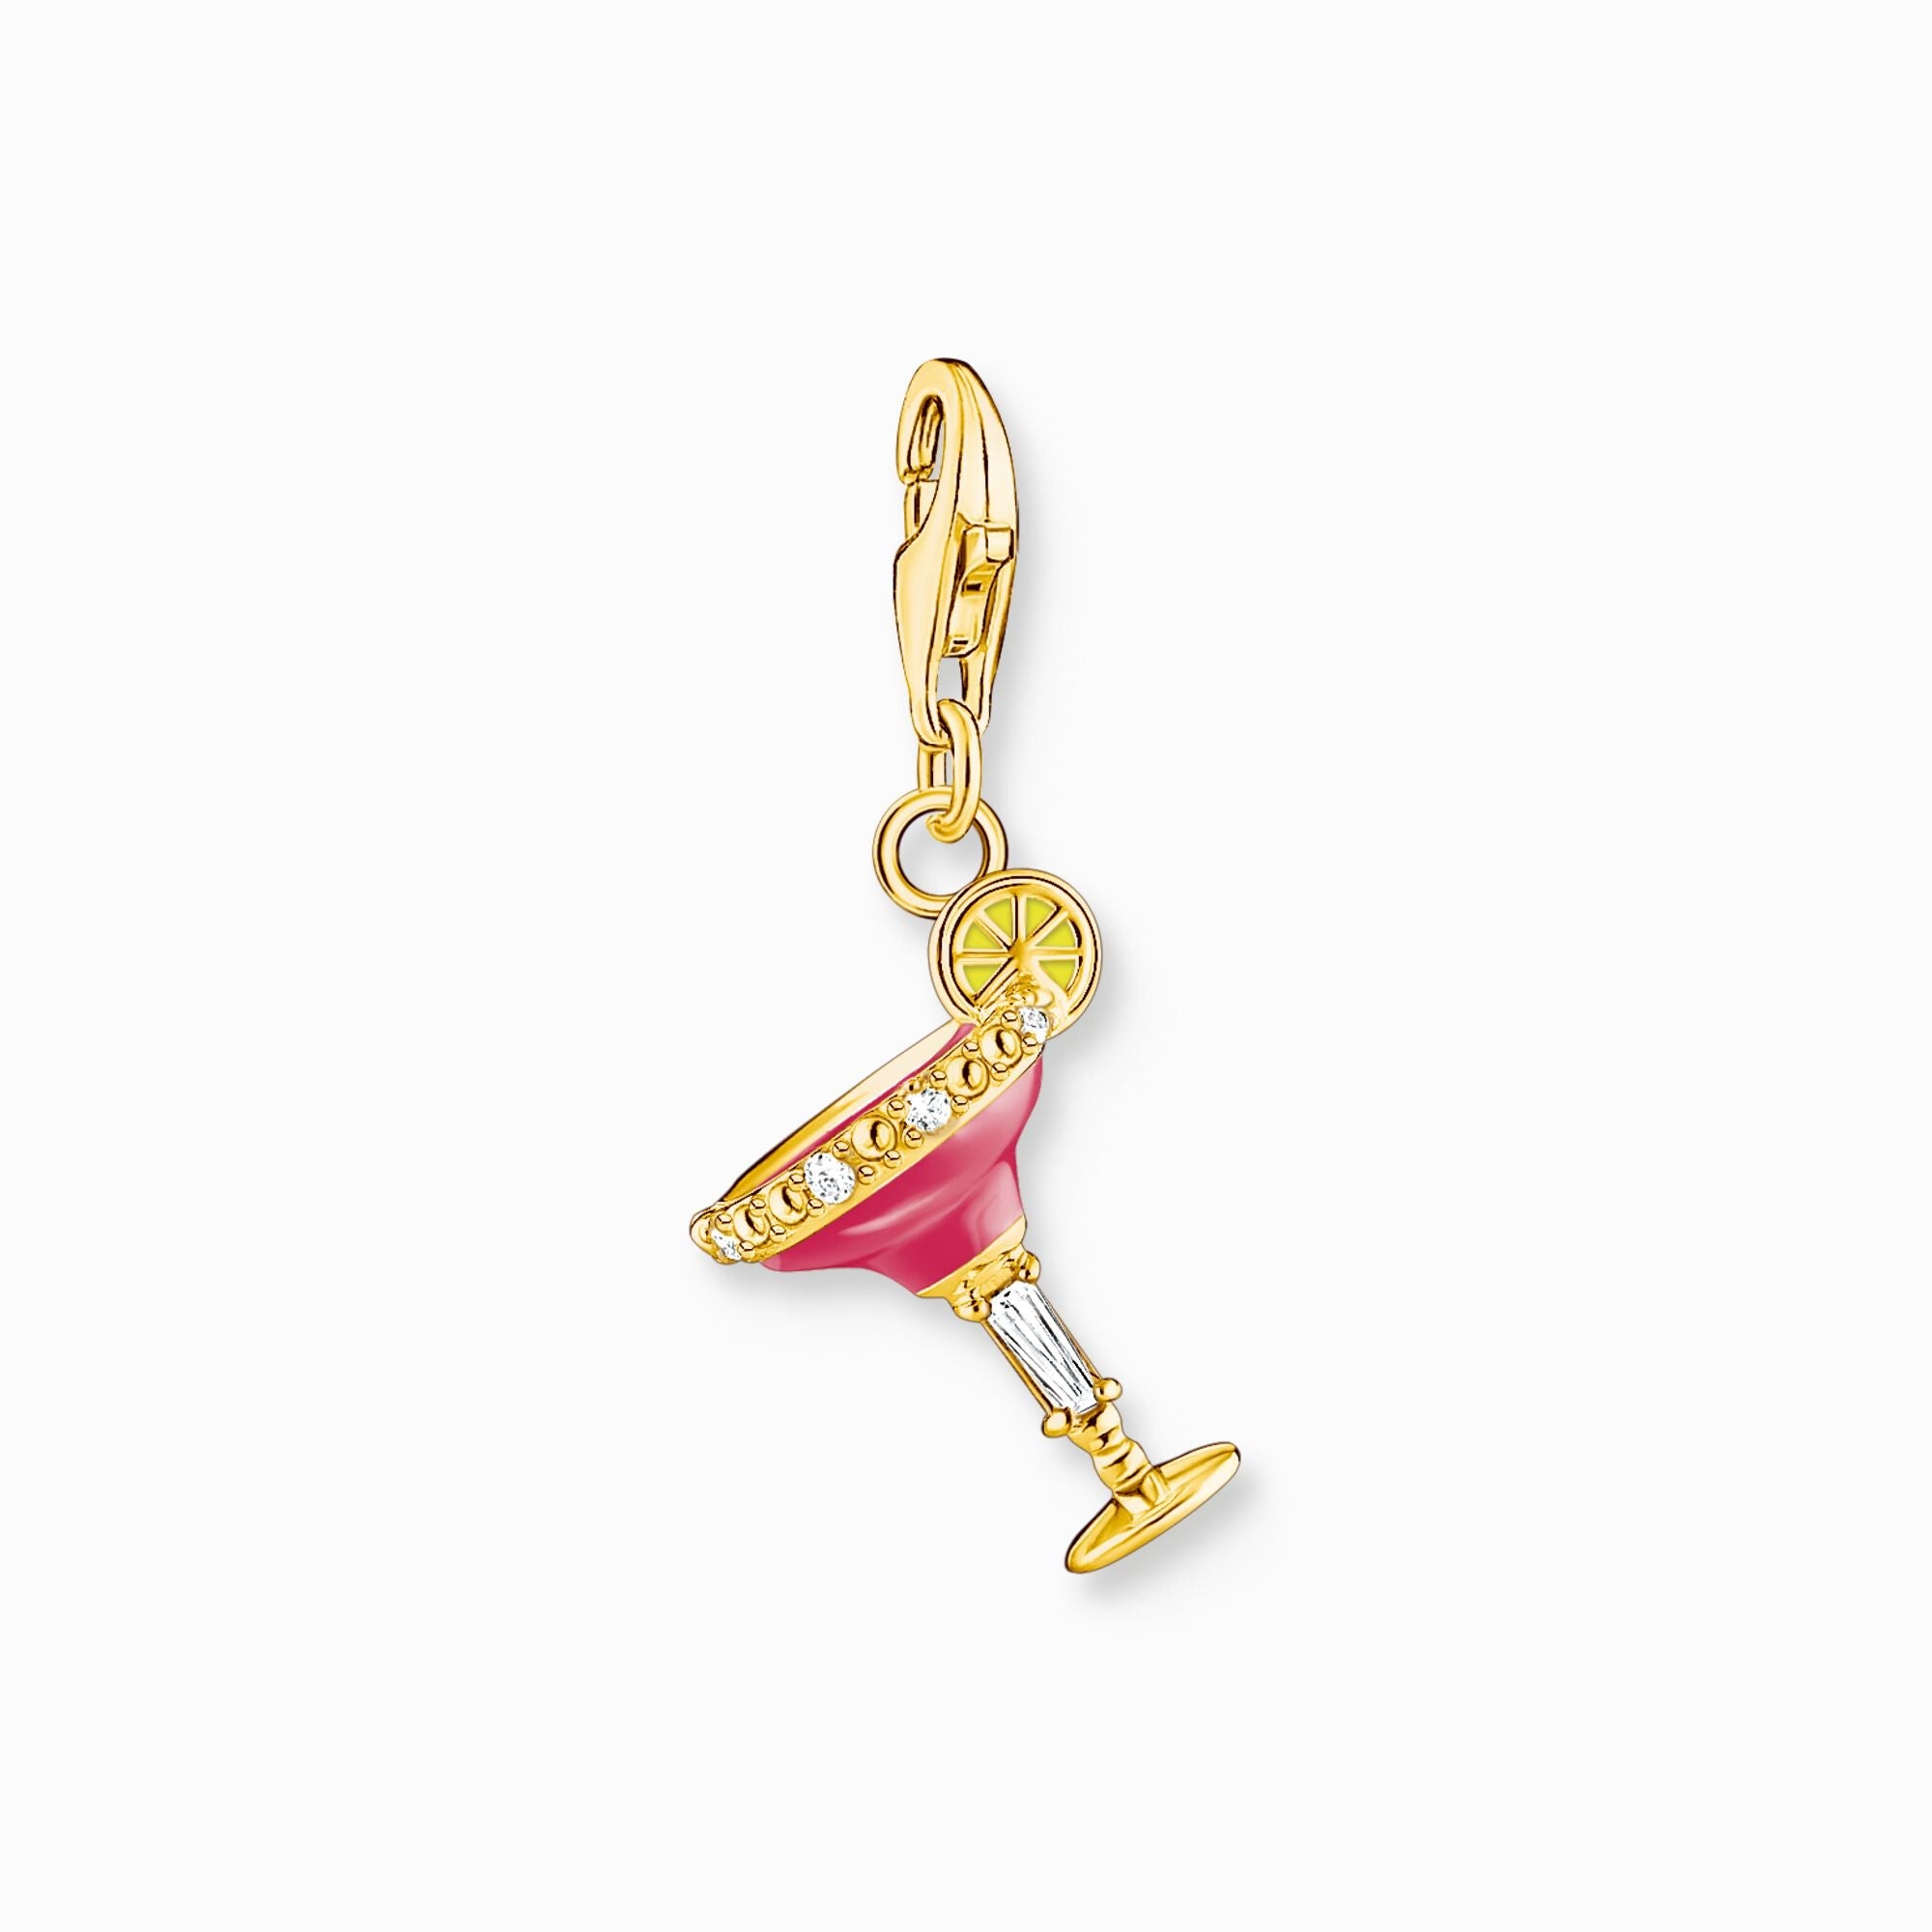 Thomas Sabo Charm Club Gold Plated Sterling Silver Red Cocktail Charm